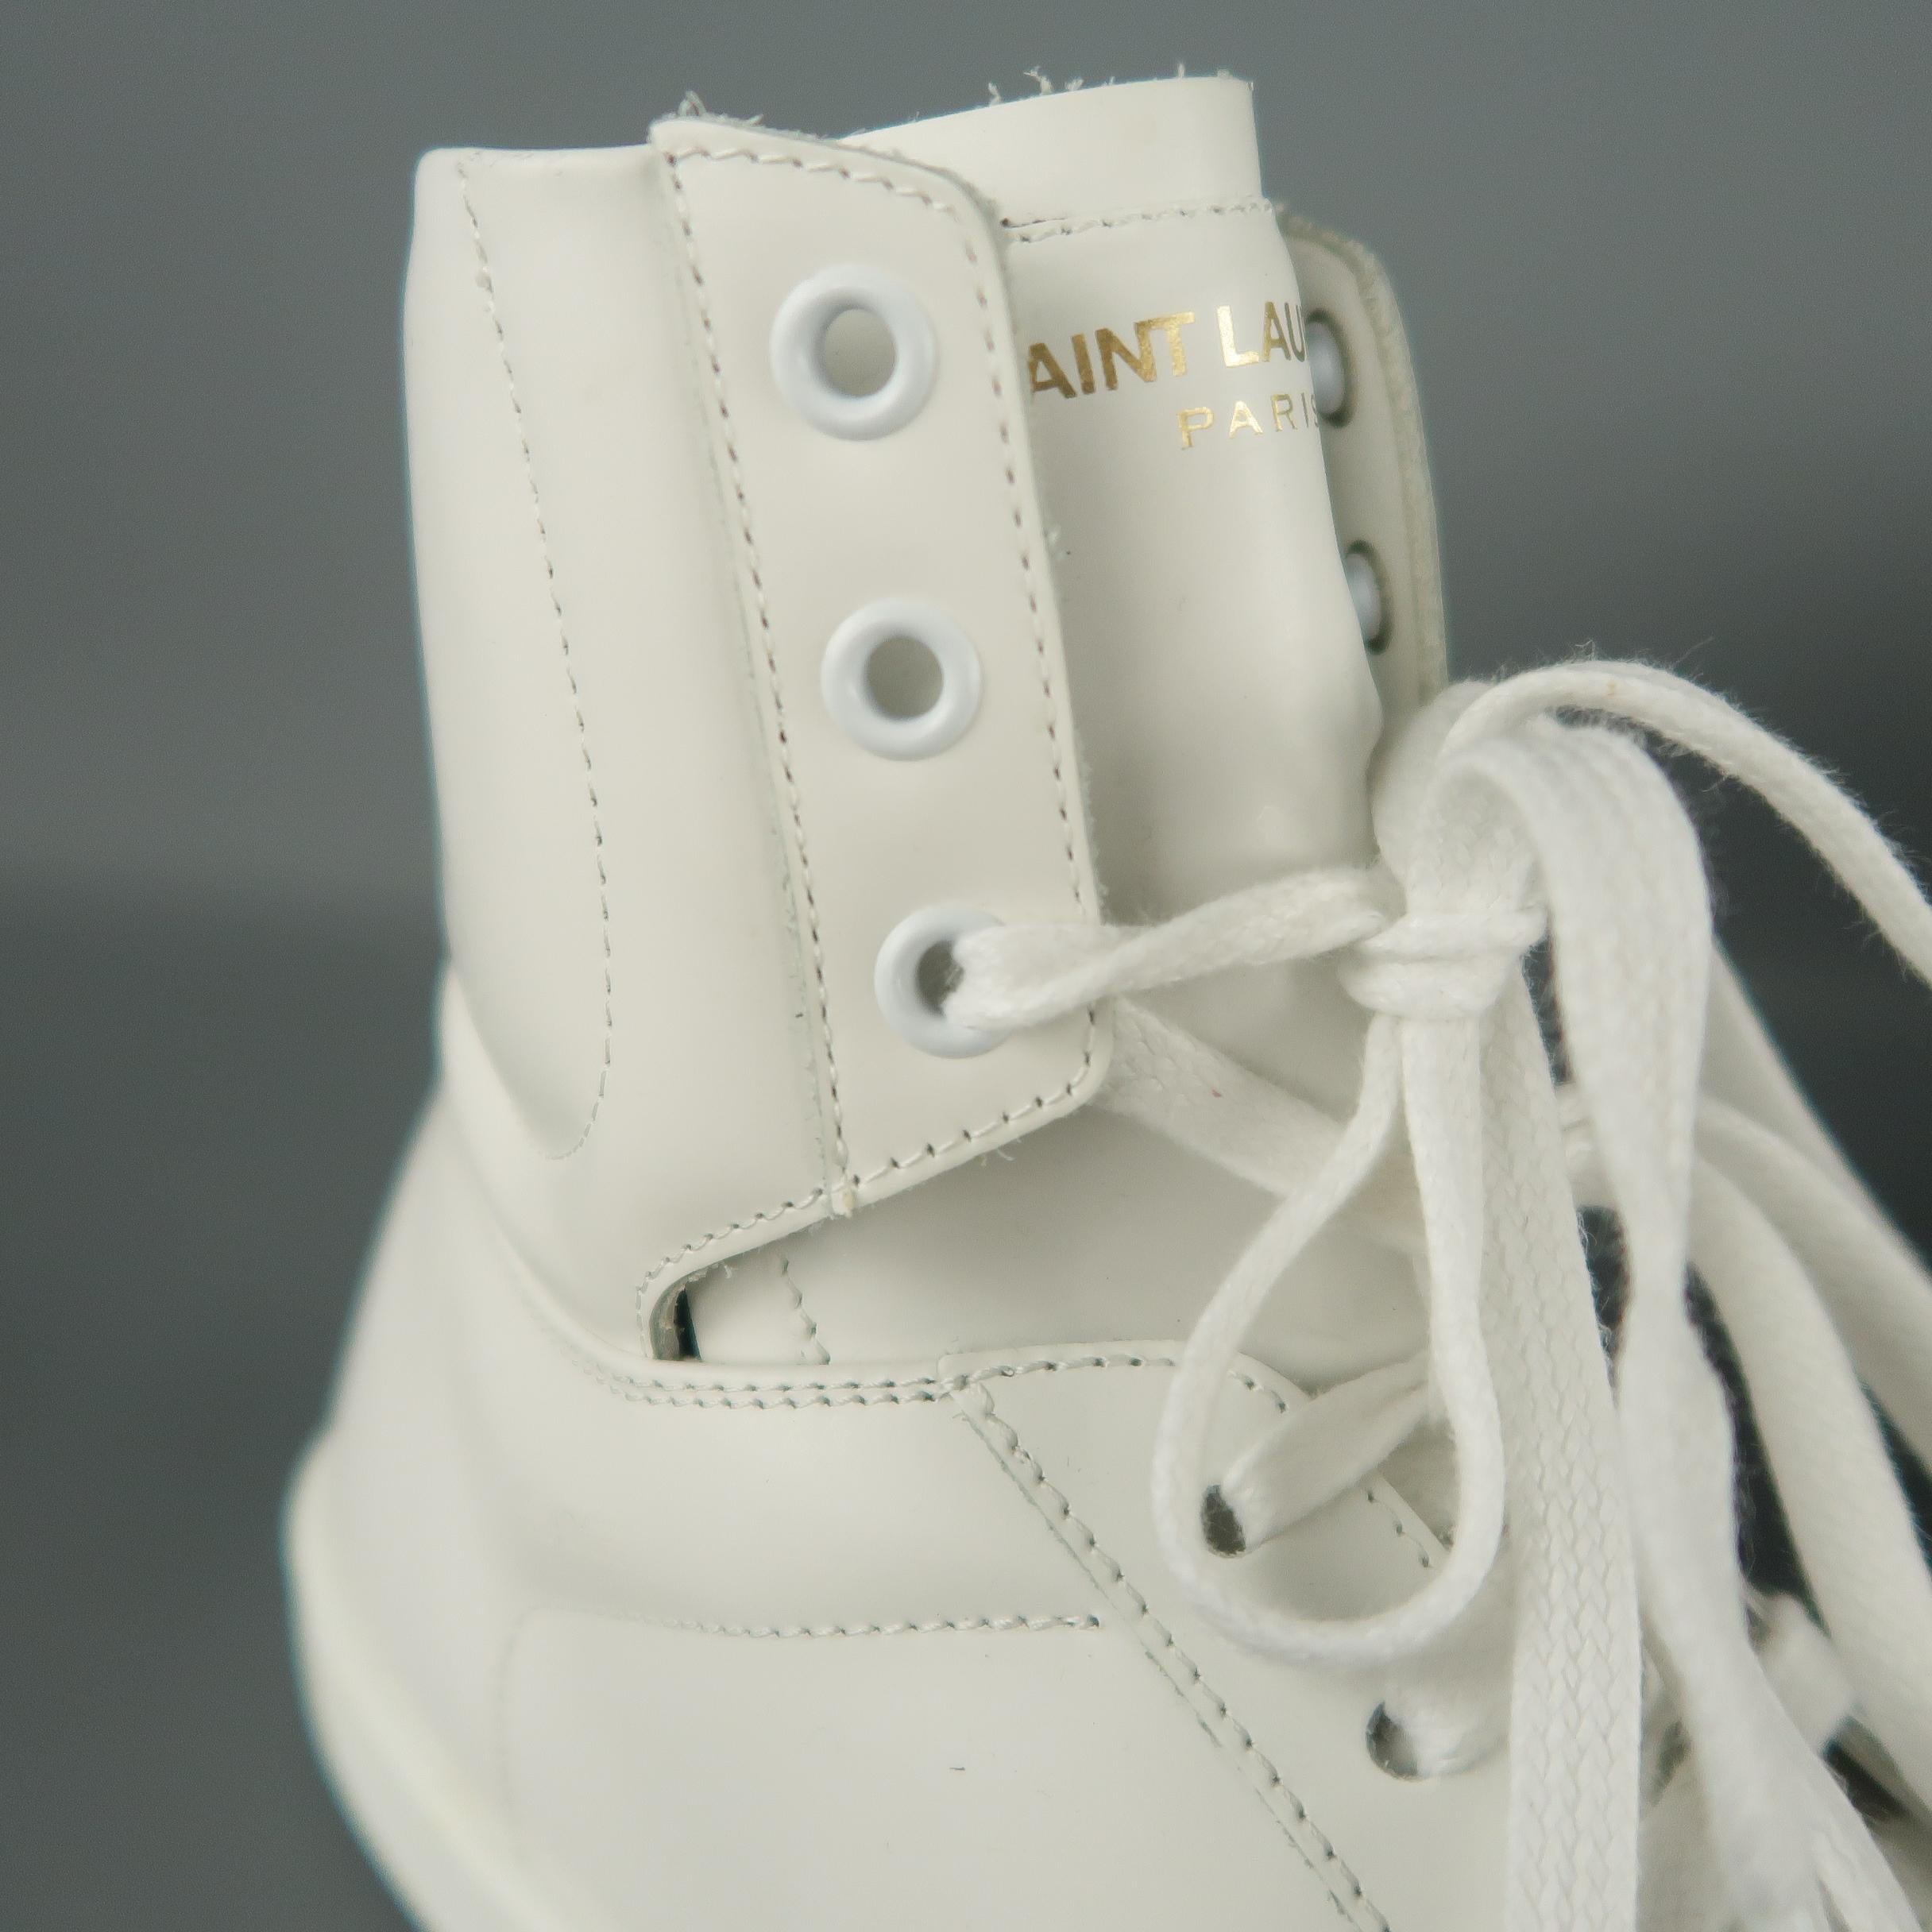 Men's SAINT LAURENT Size 6 White Leather High Top Sneakers w/ Box 9